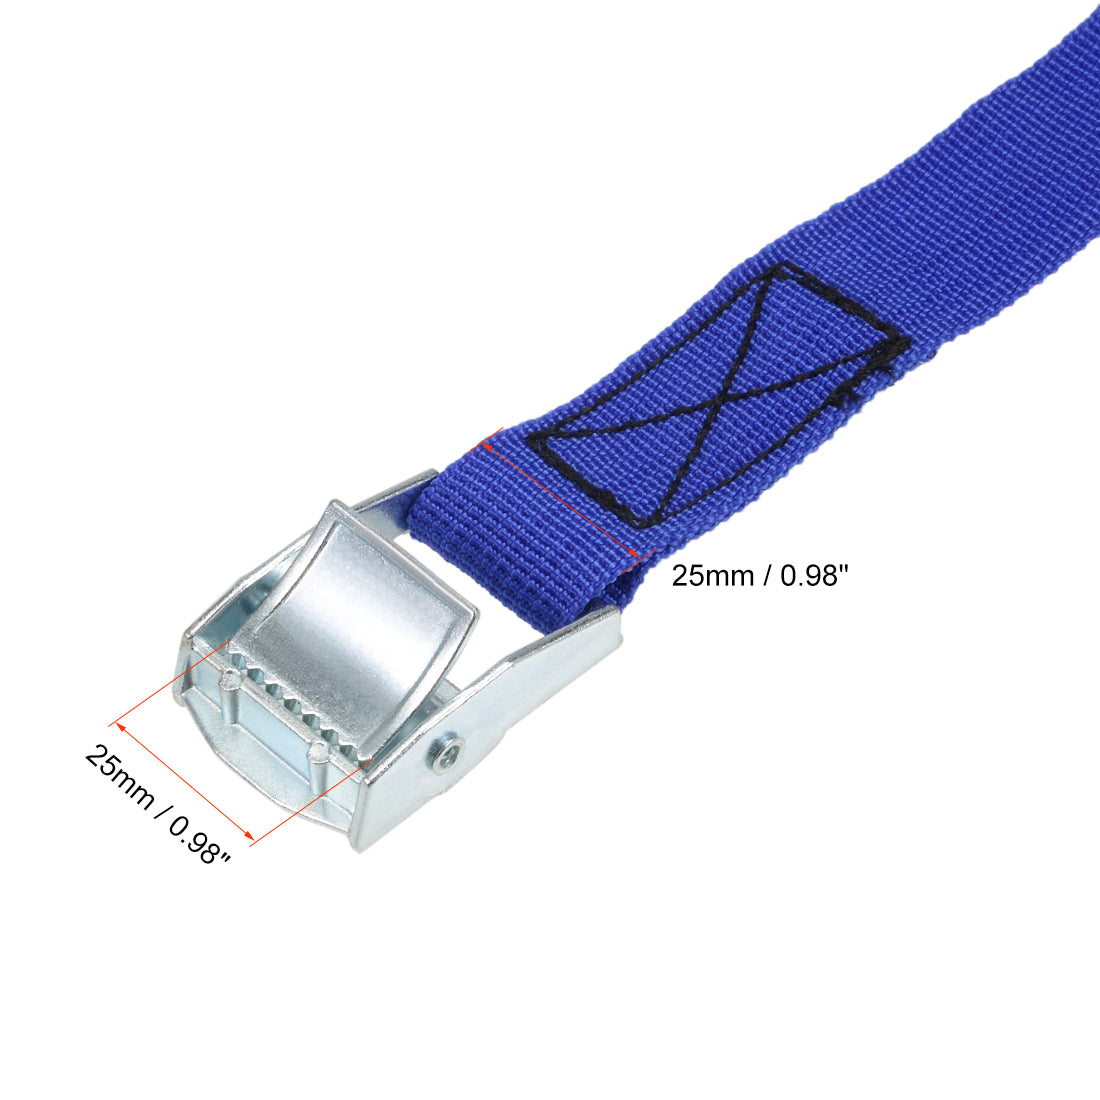 uxcell Uxcell 5.5M x 25mm Lashing Strap Cargo Tie Down Straps w Cam Lock Buckle 250Kg Work Load, Blue, 2Pcs